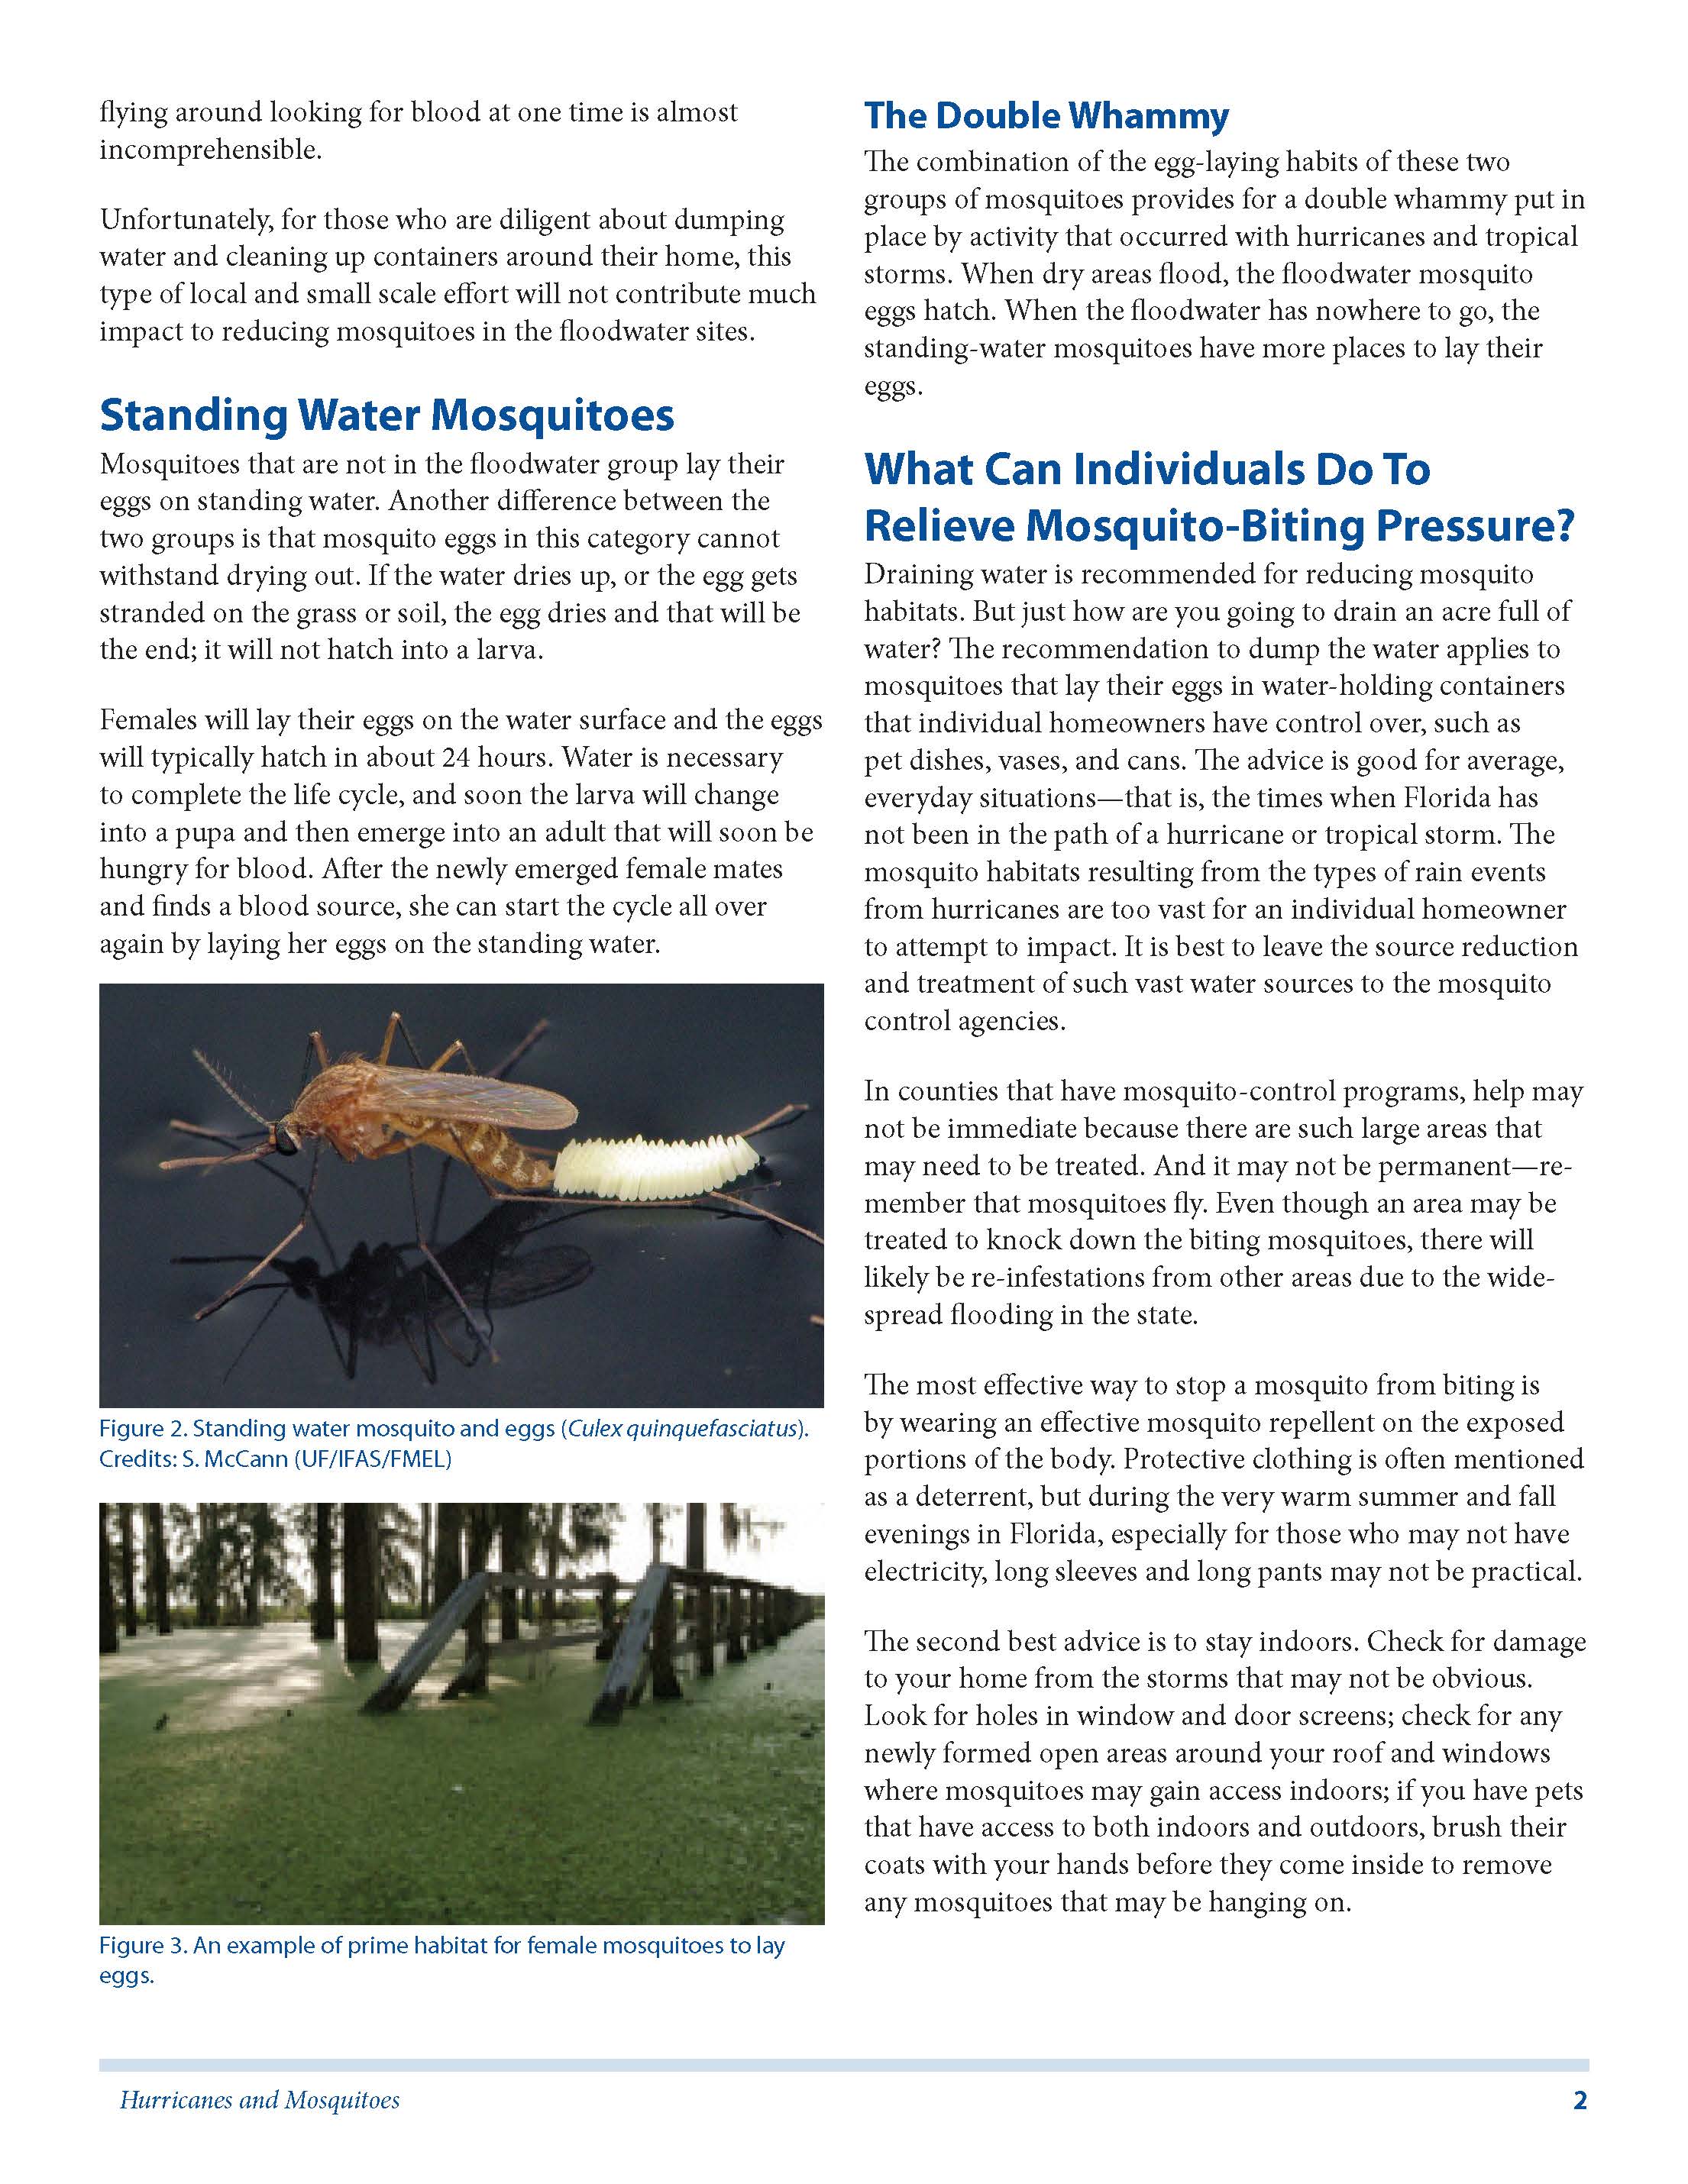 Hurricanes and Mosquitoes_Page_2 Article from Roxanne Connelly UF IFAS Extention 